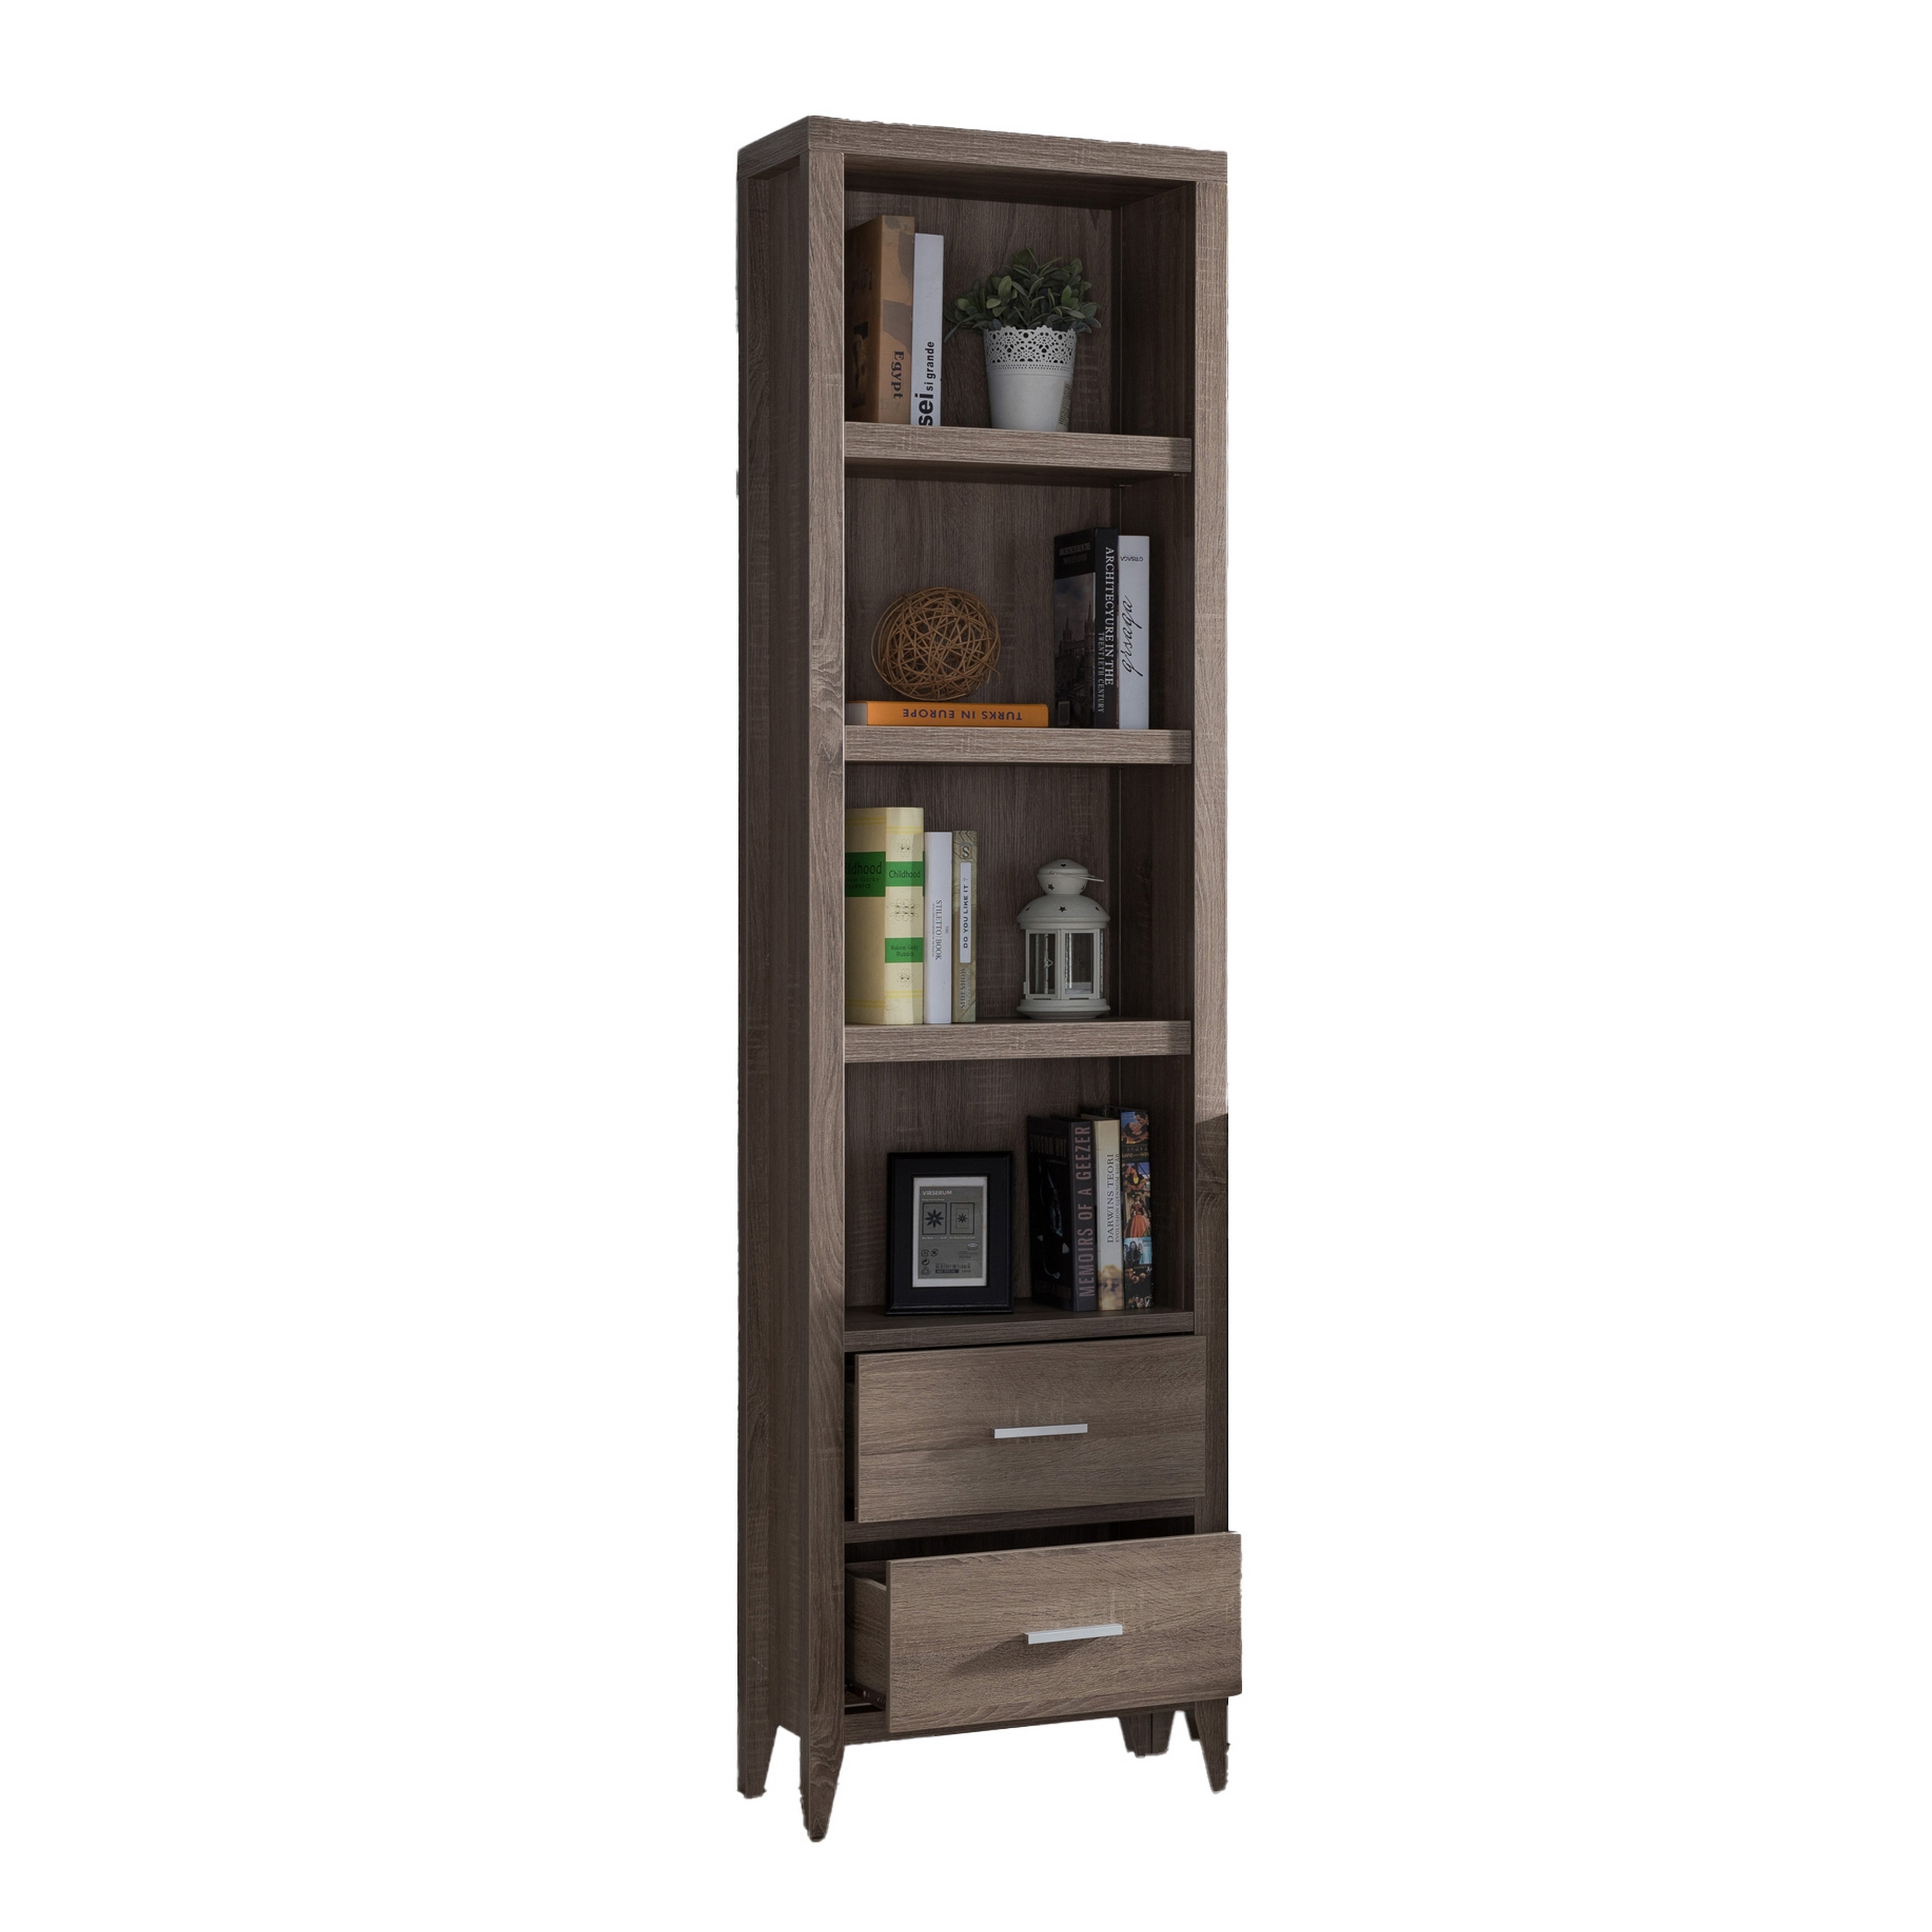 Wooden Media Tower With Four Open Shelves And Two Drawers, Dark Taupe Brown- Saltoro Sherpi